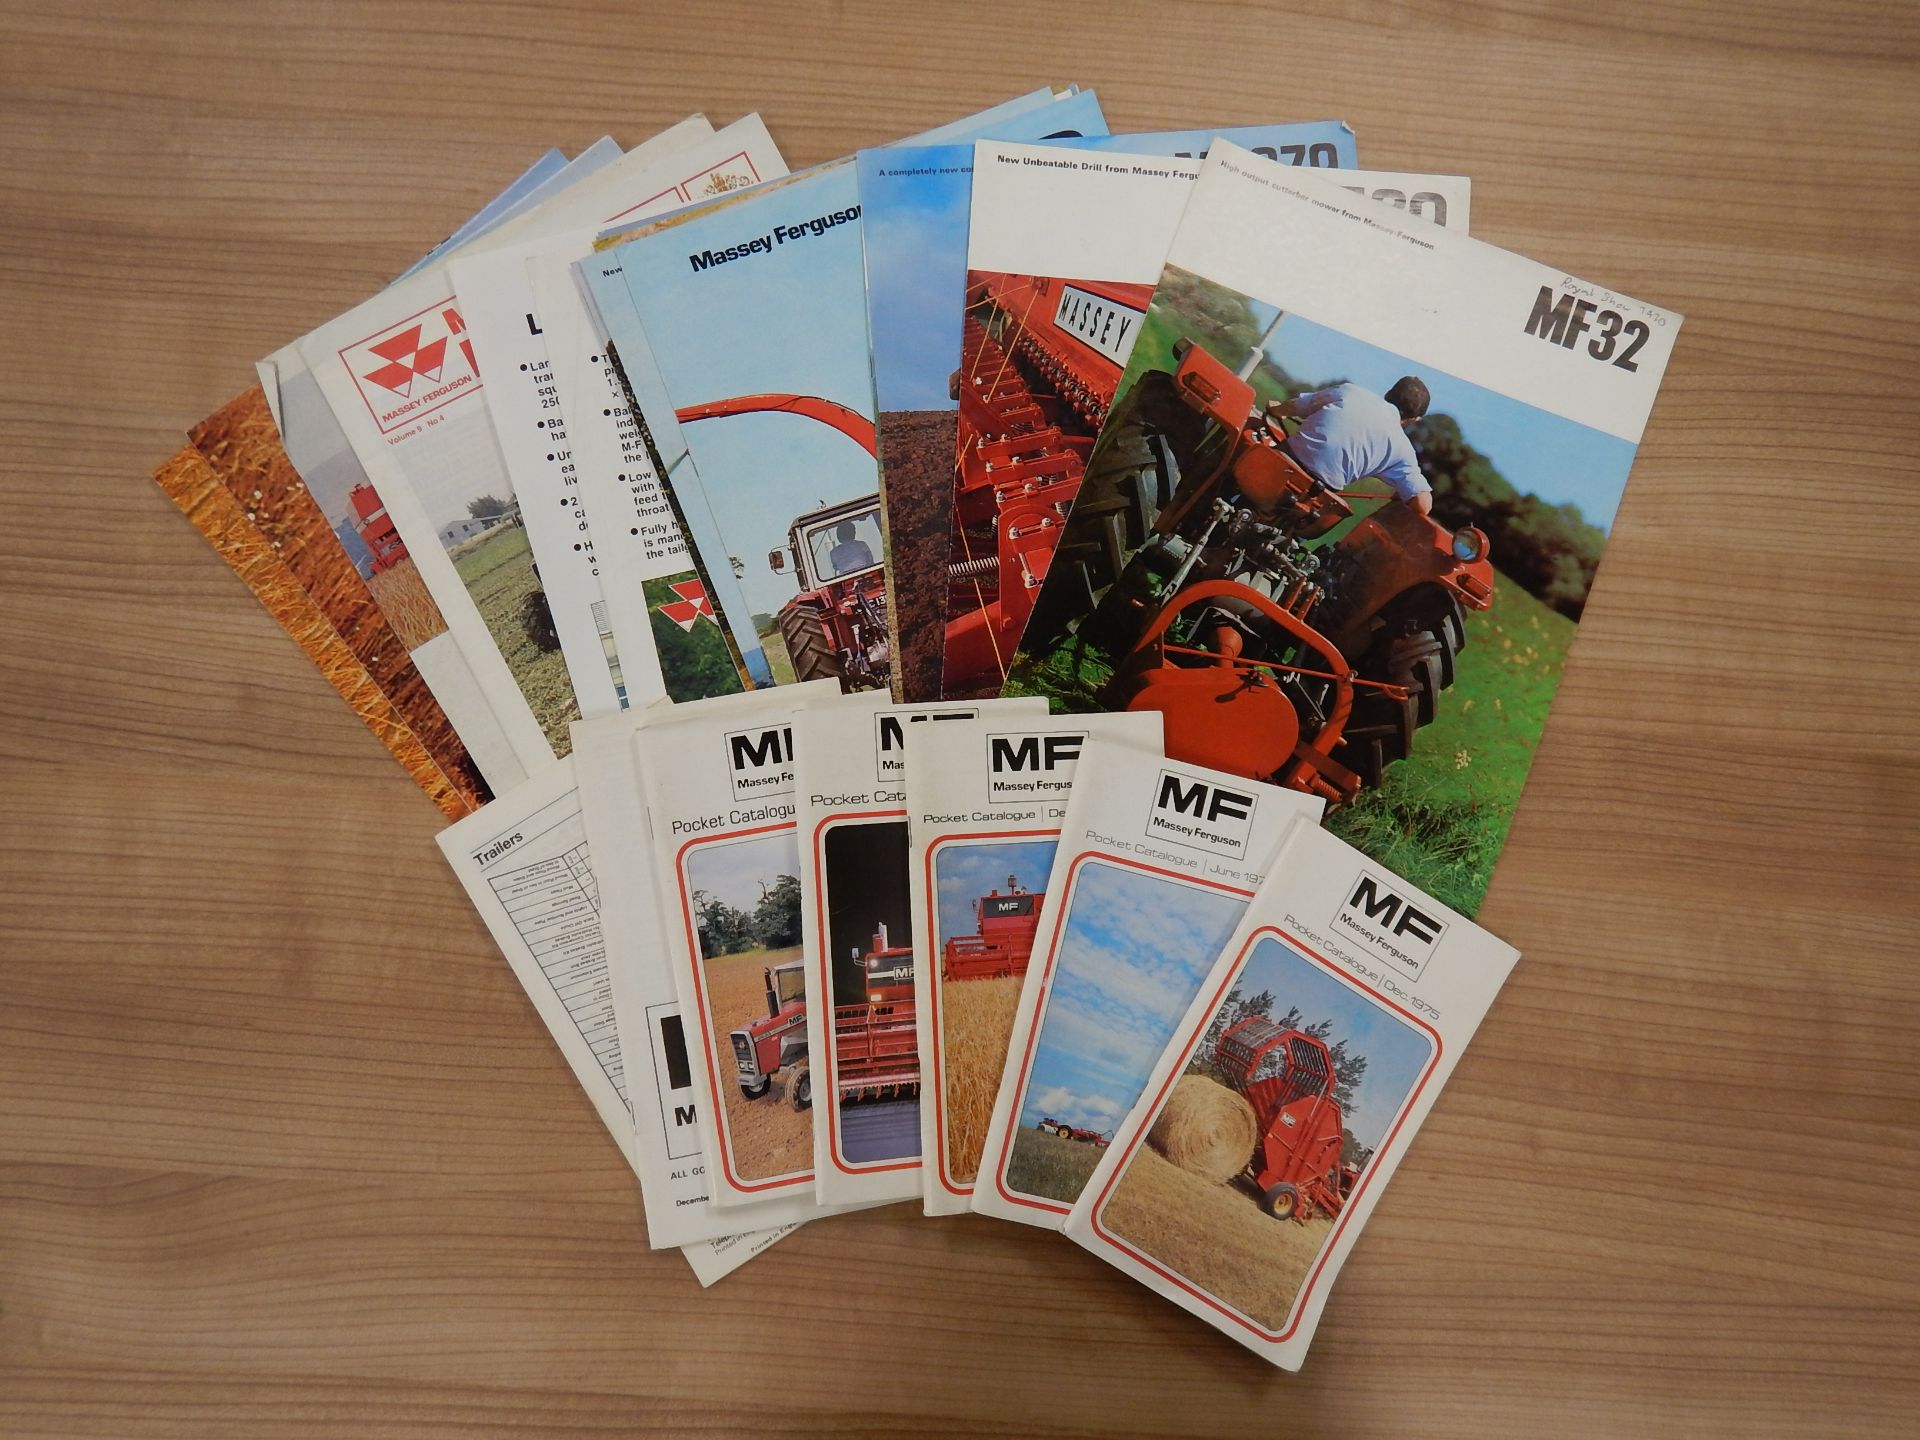 Qty Massey Ferguson colour brochures and pocket catalogues to include 32 mower, 30 drill, plough